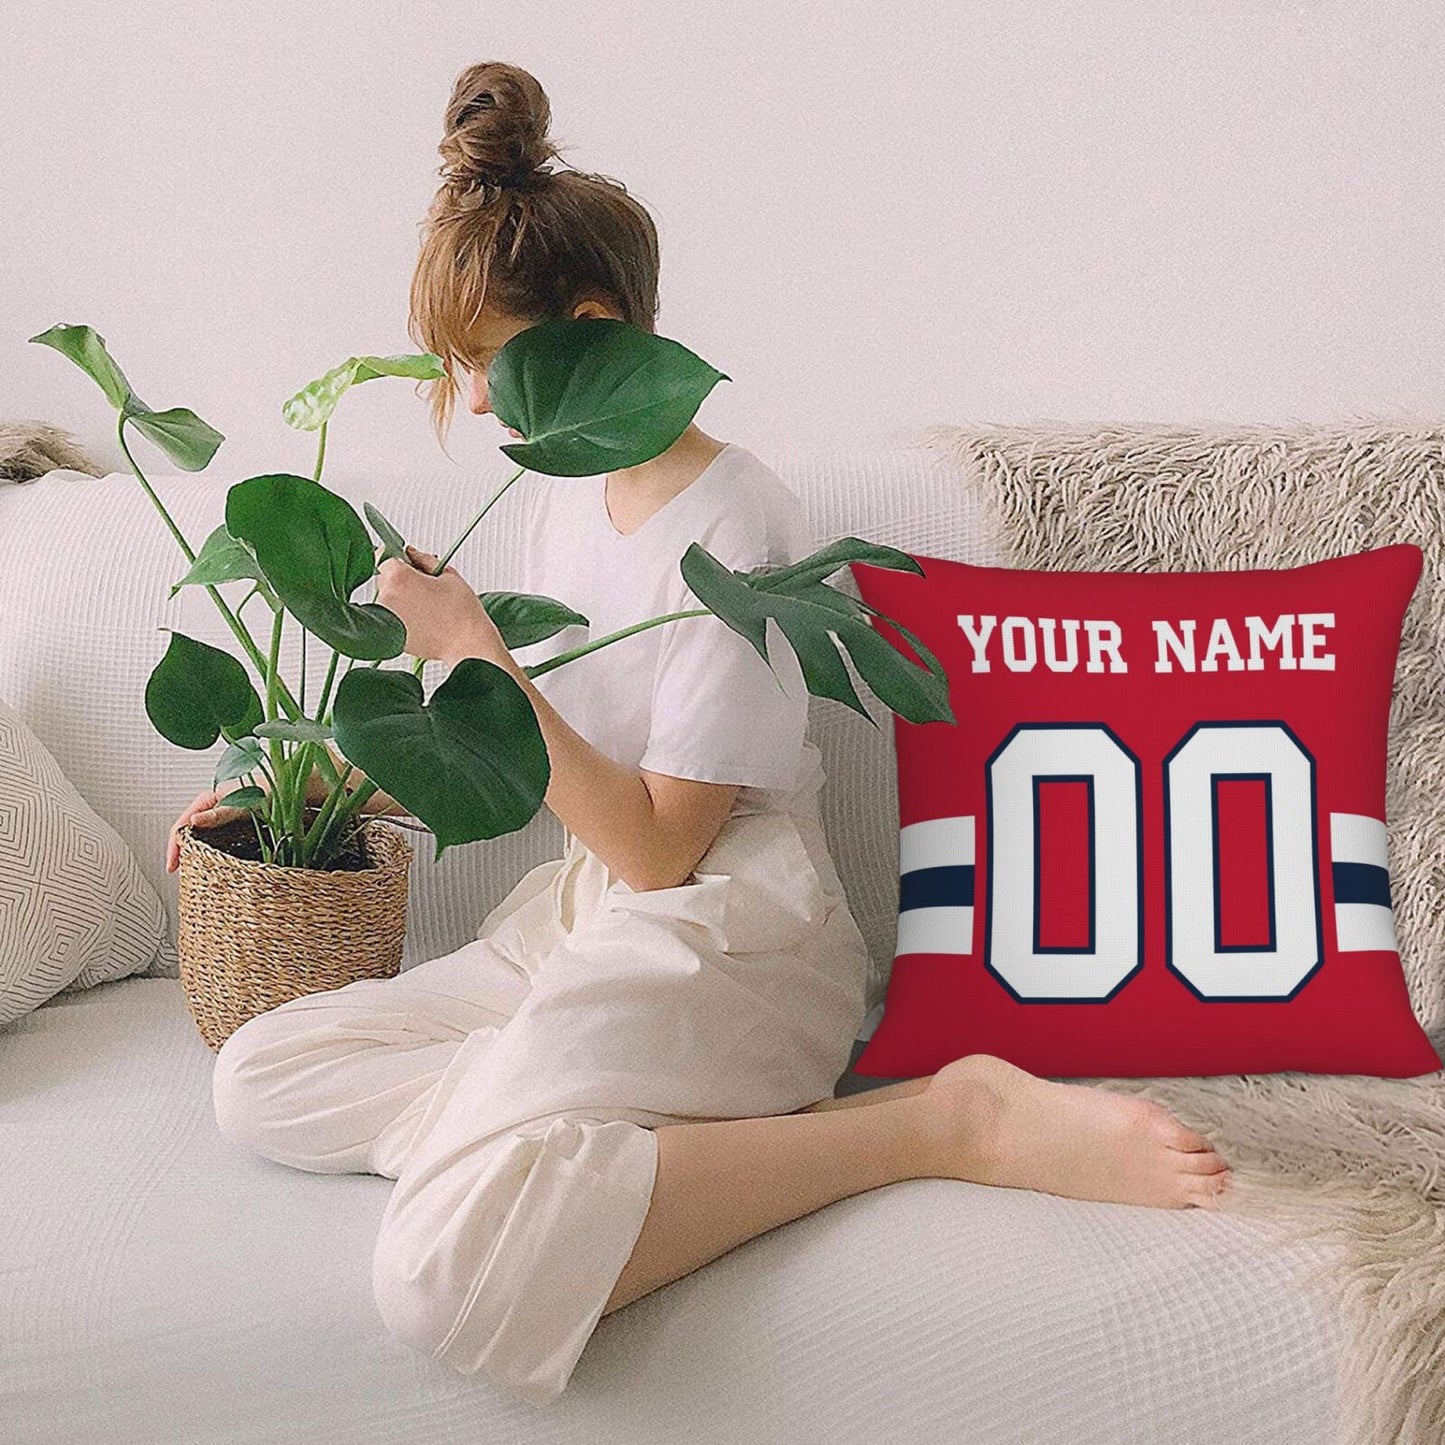 Customized New England Patriots Football Team Decorative Throw Pillow Case Print Personalized Football Style Fans Letters & Number Red Pillowcase Birthday Gift